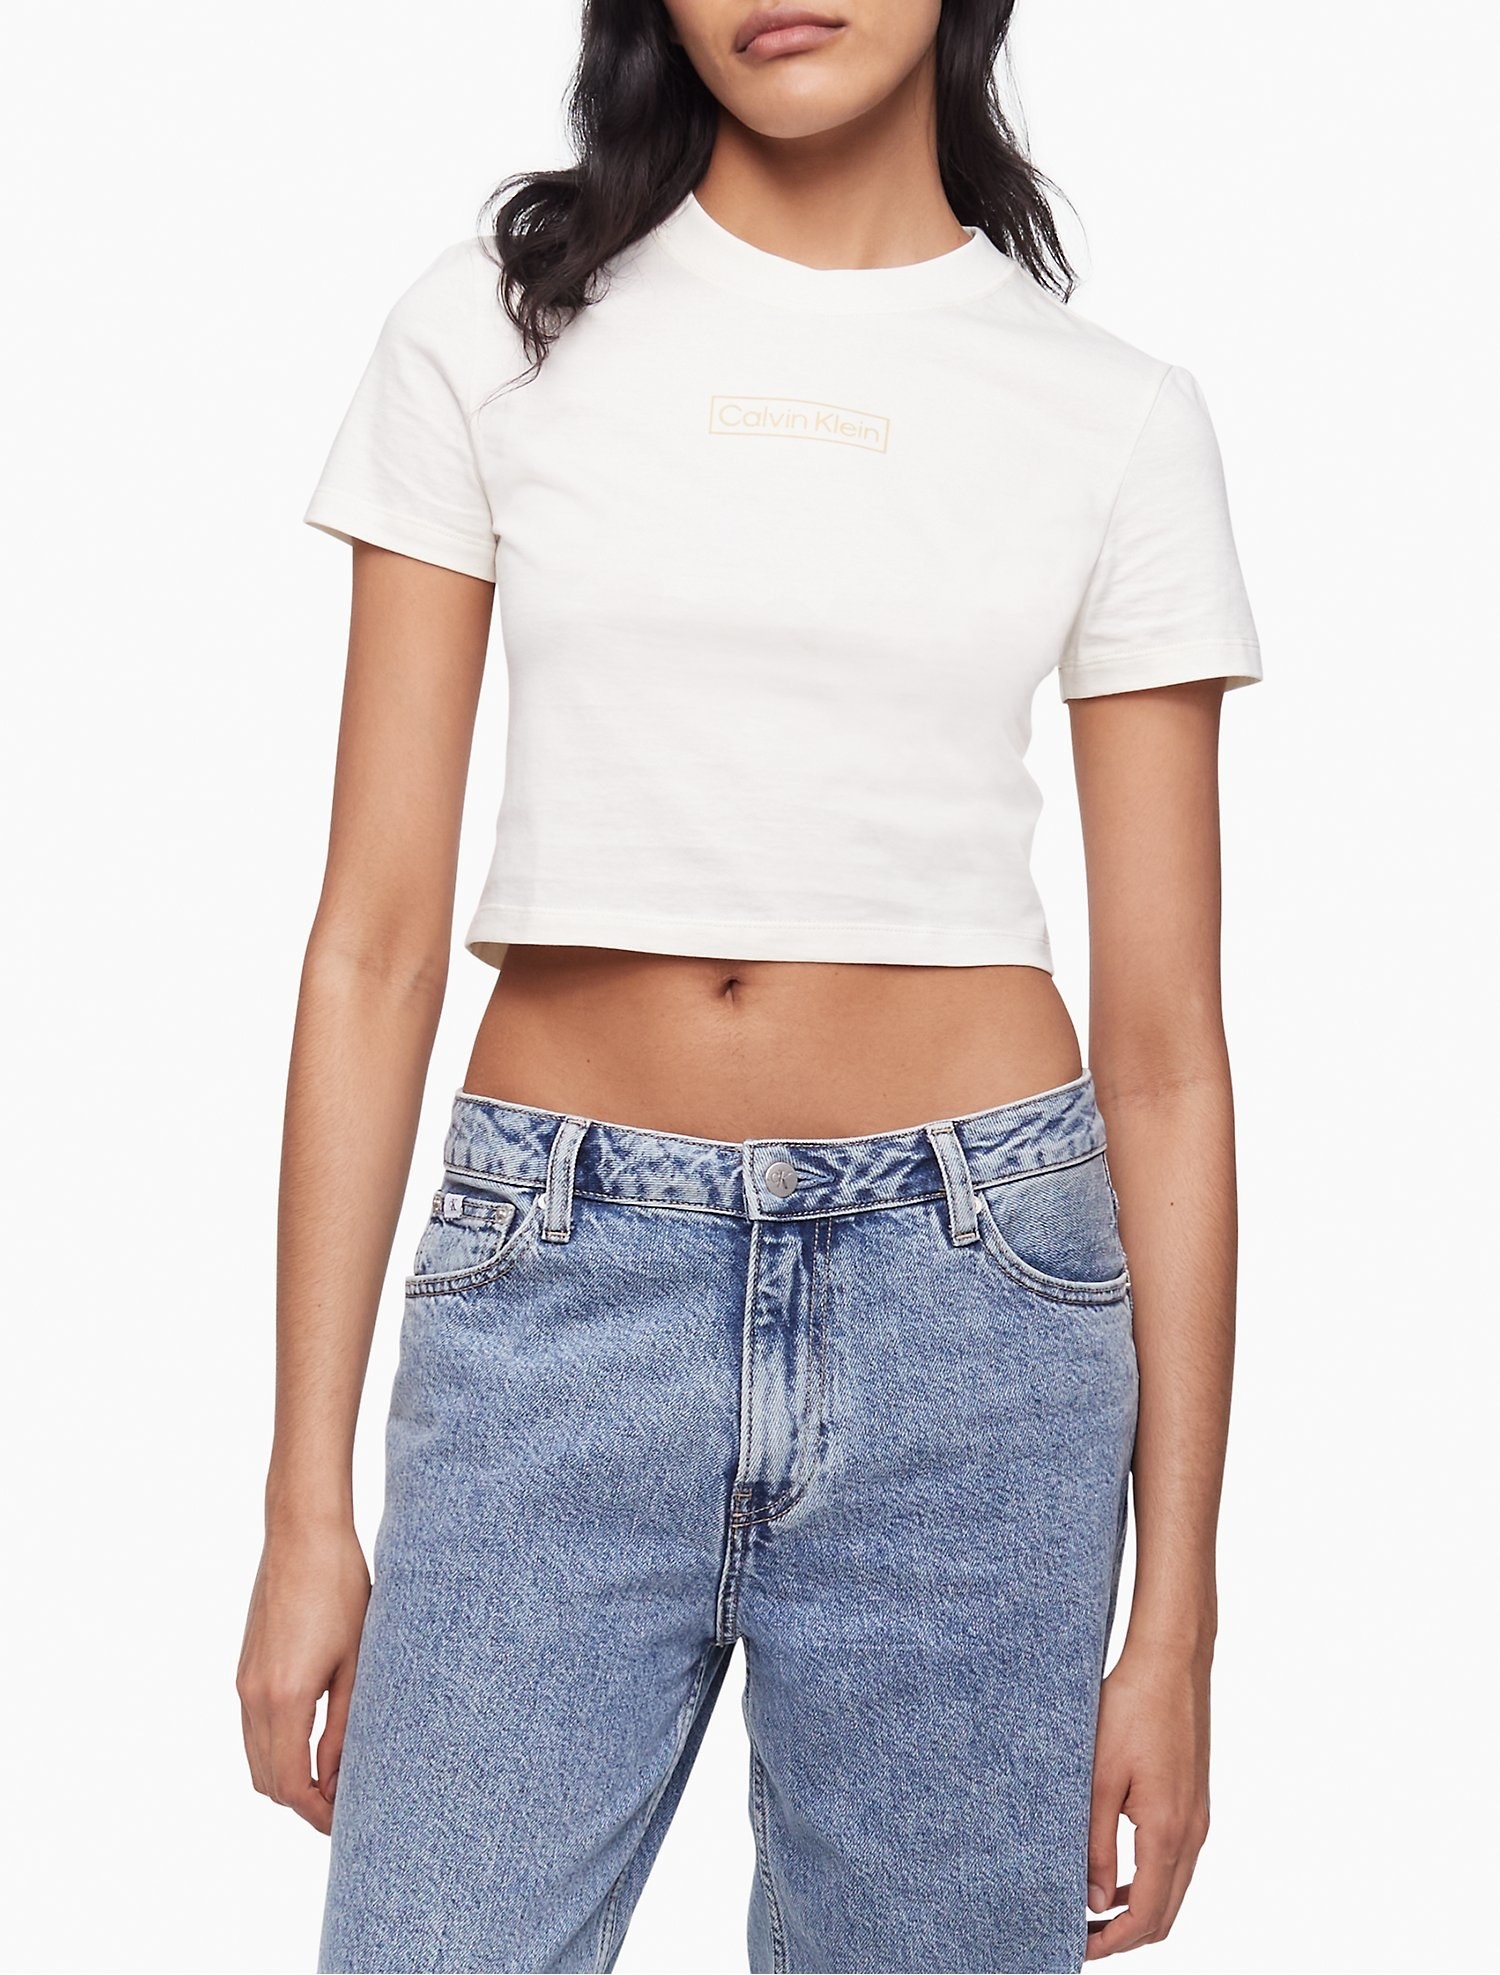 Model wearing white crop top and low rise medium wash jeans